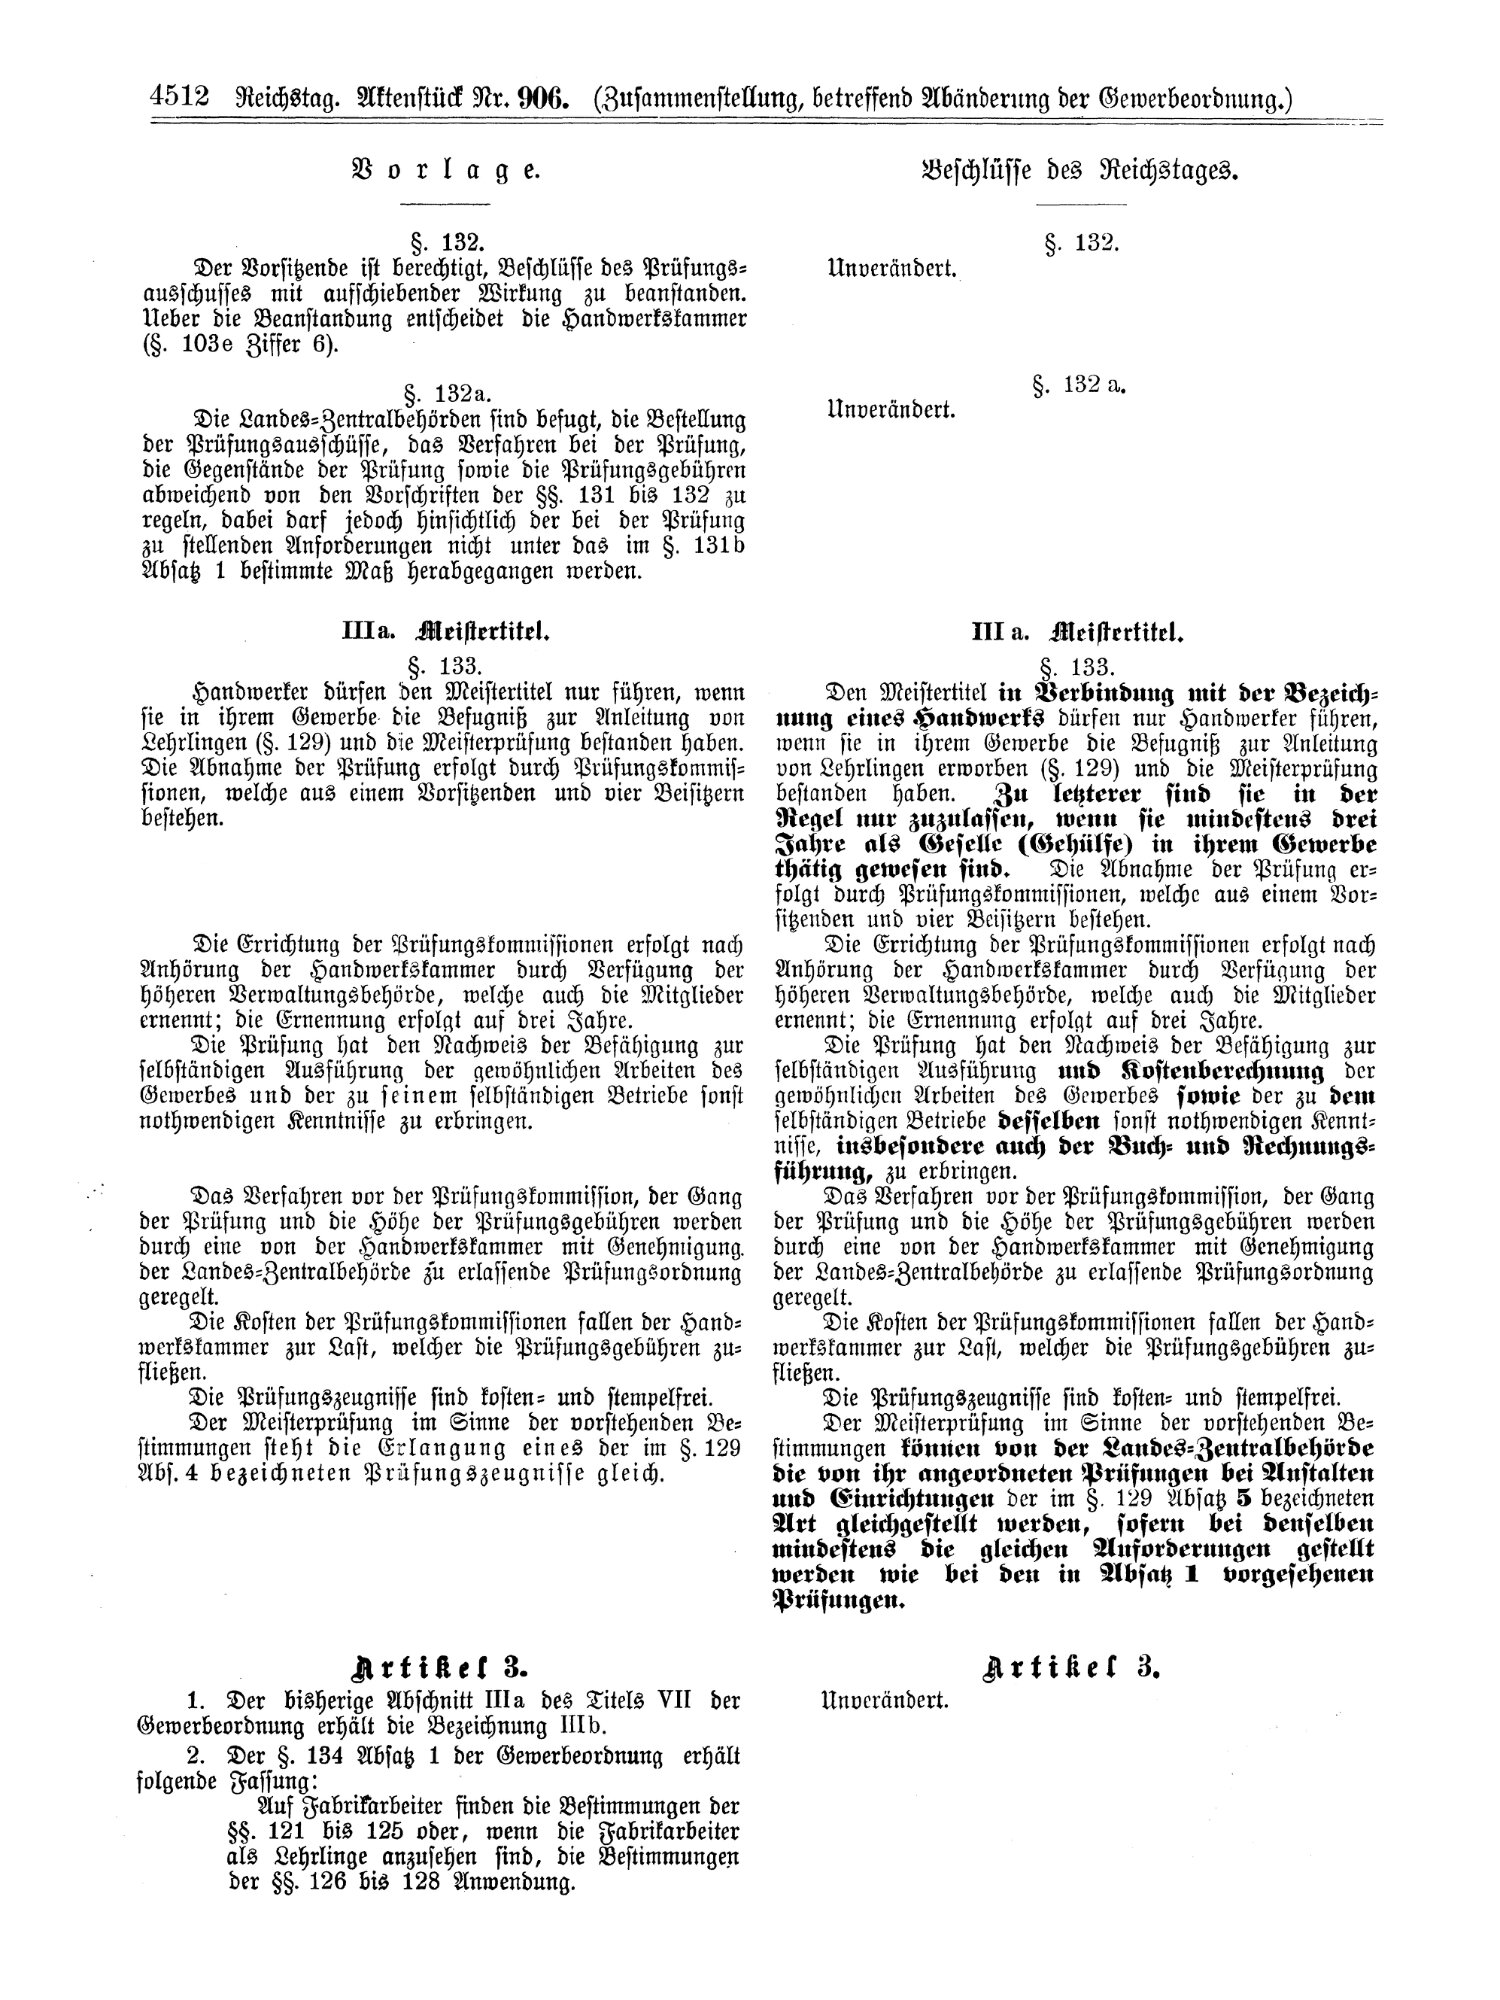 Scan of page 4512